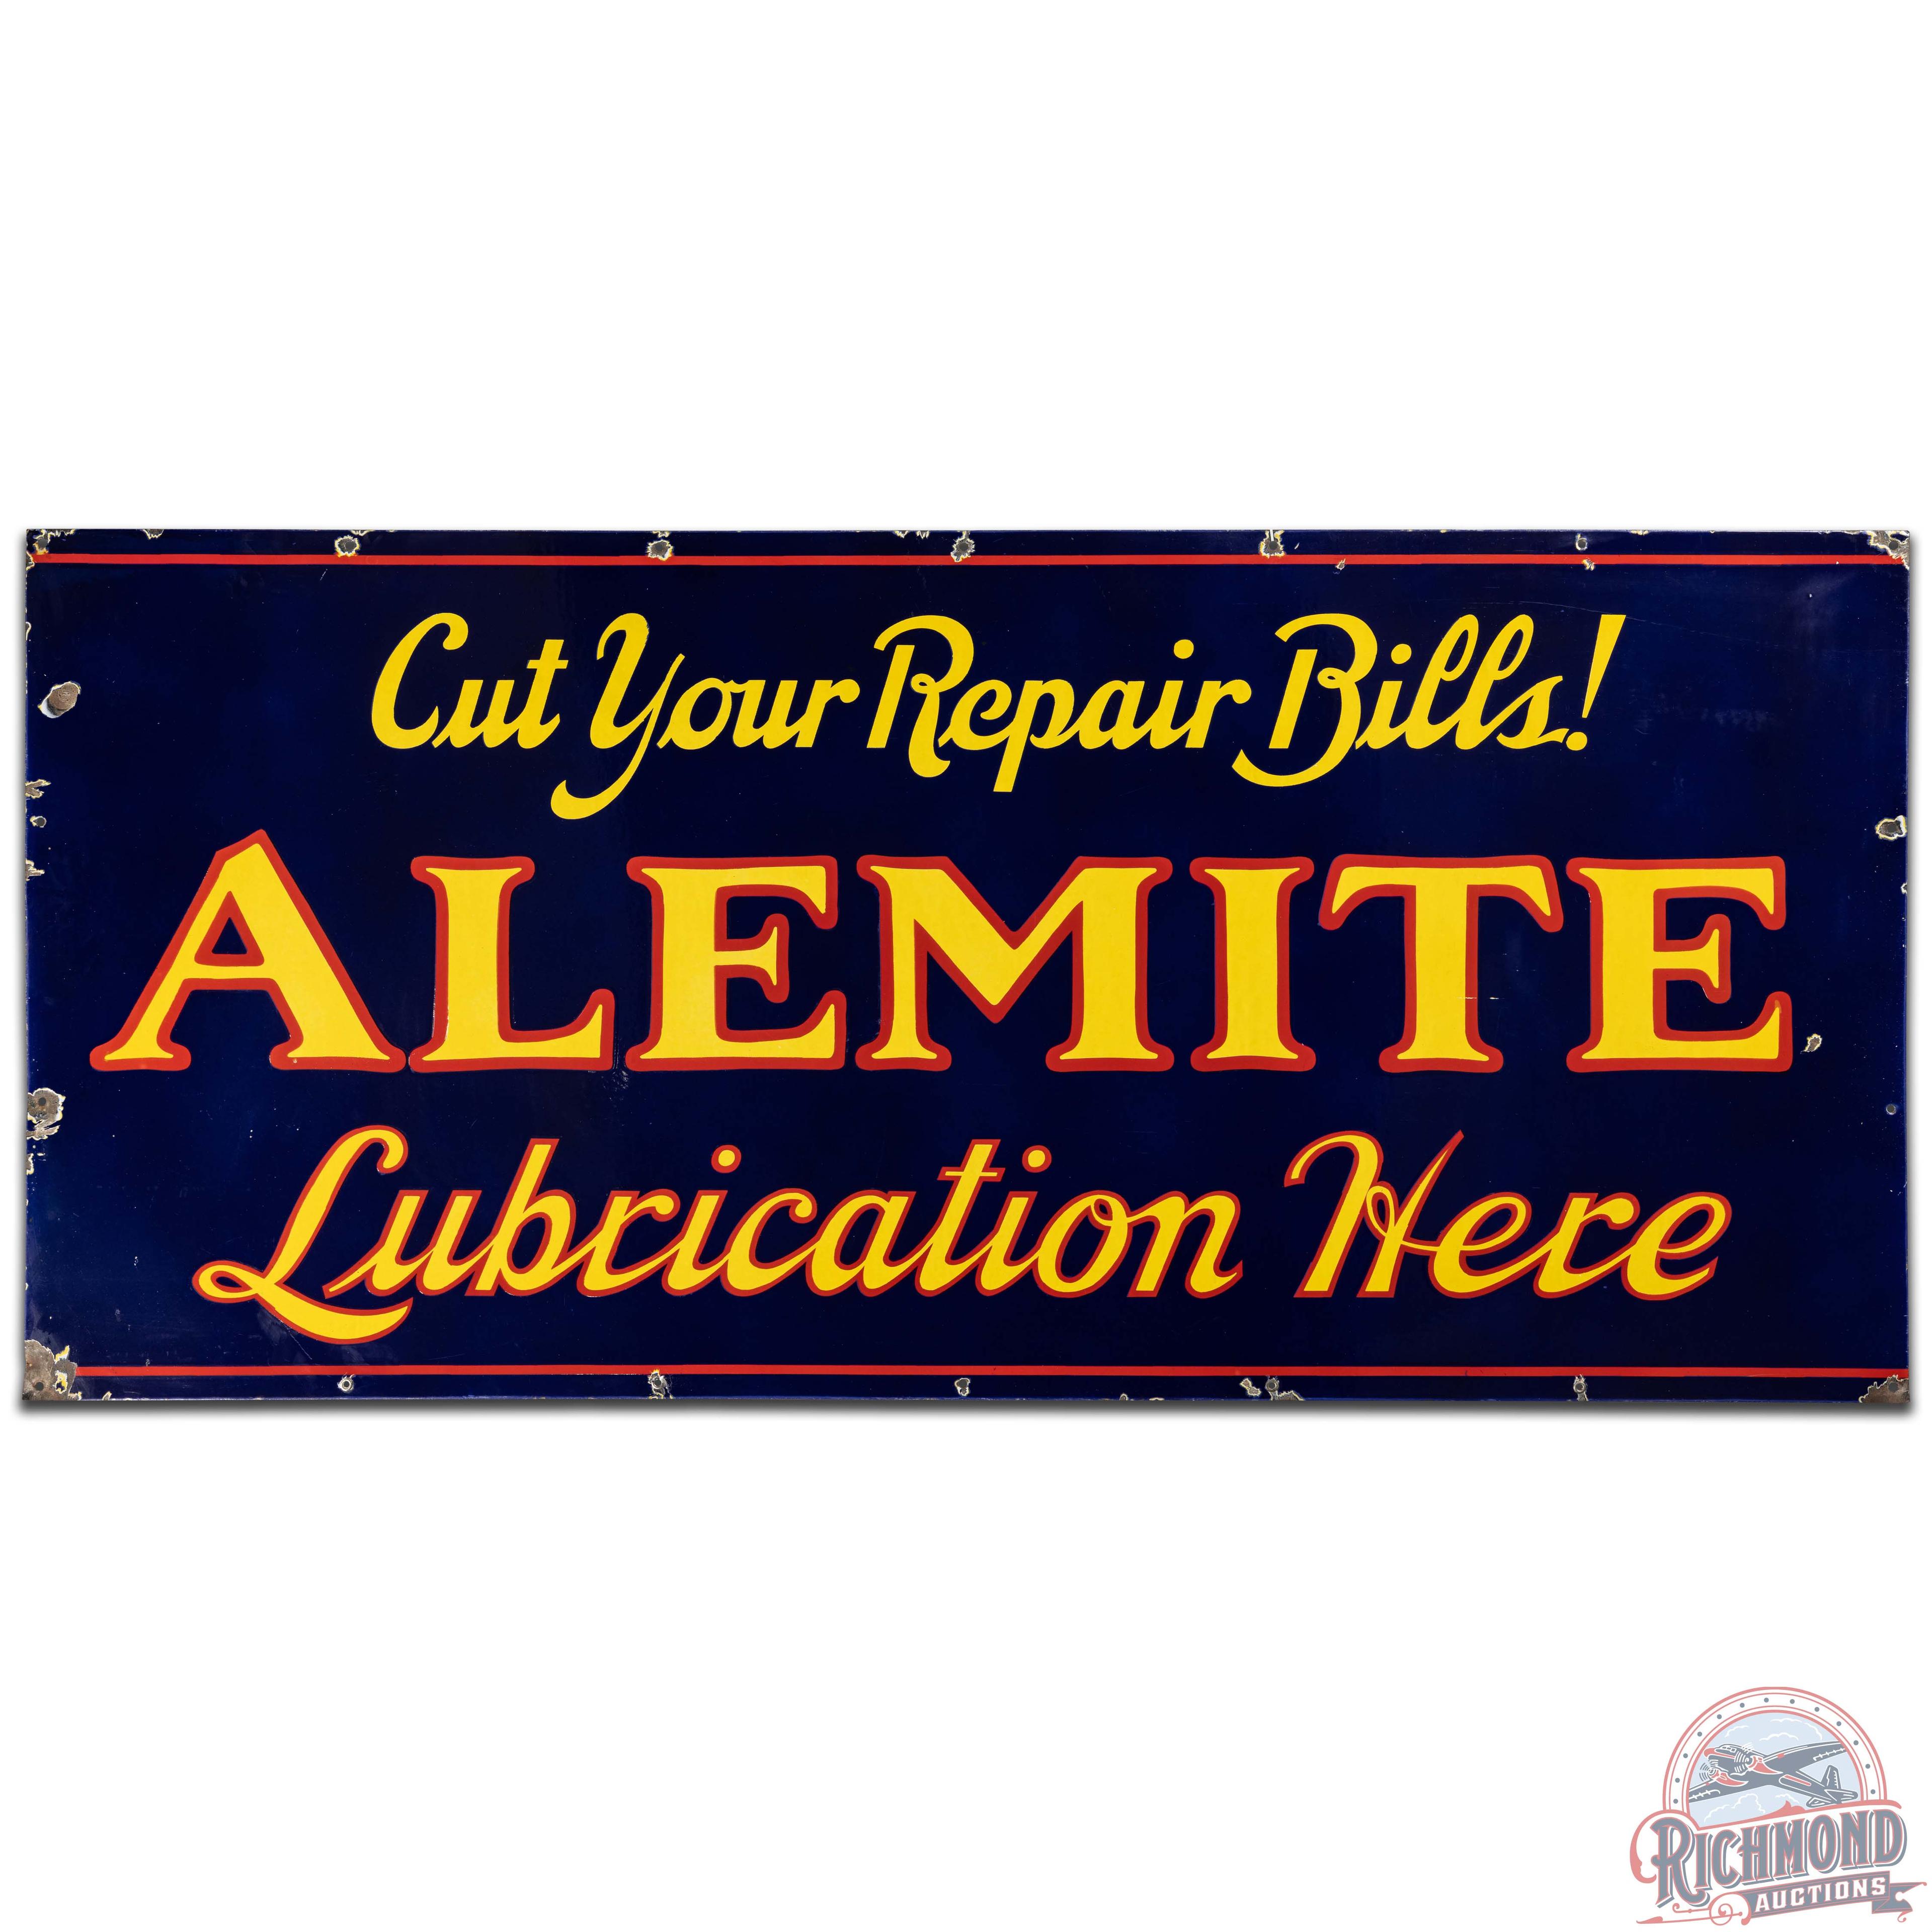 Alemite "Cut Your Repair Bills!" Lubrication Here SS Porcelain Sign